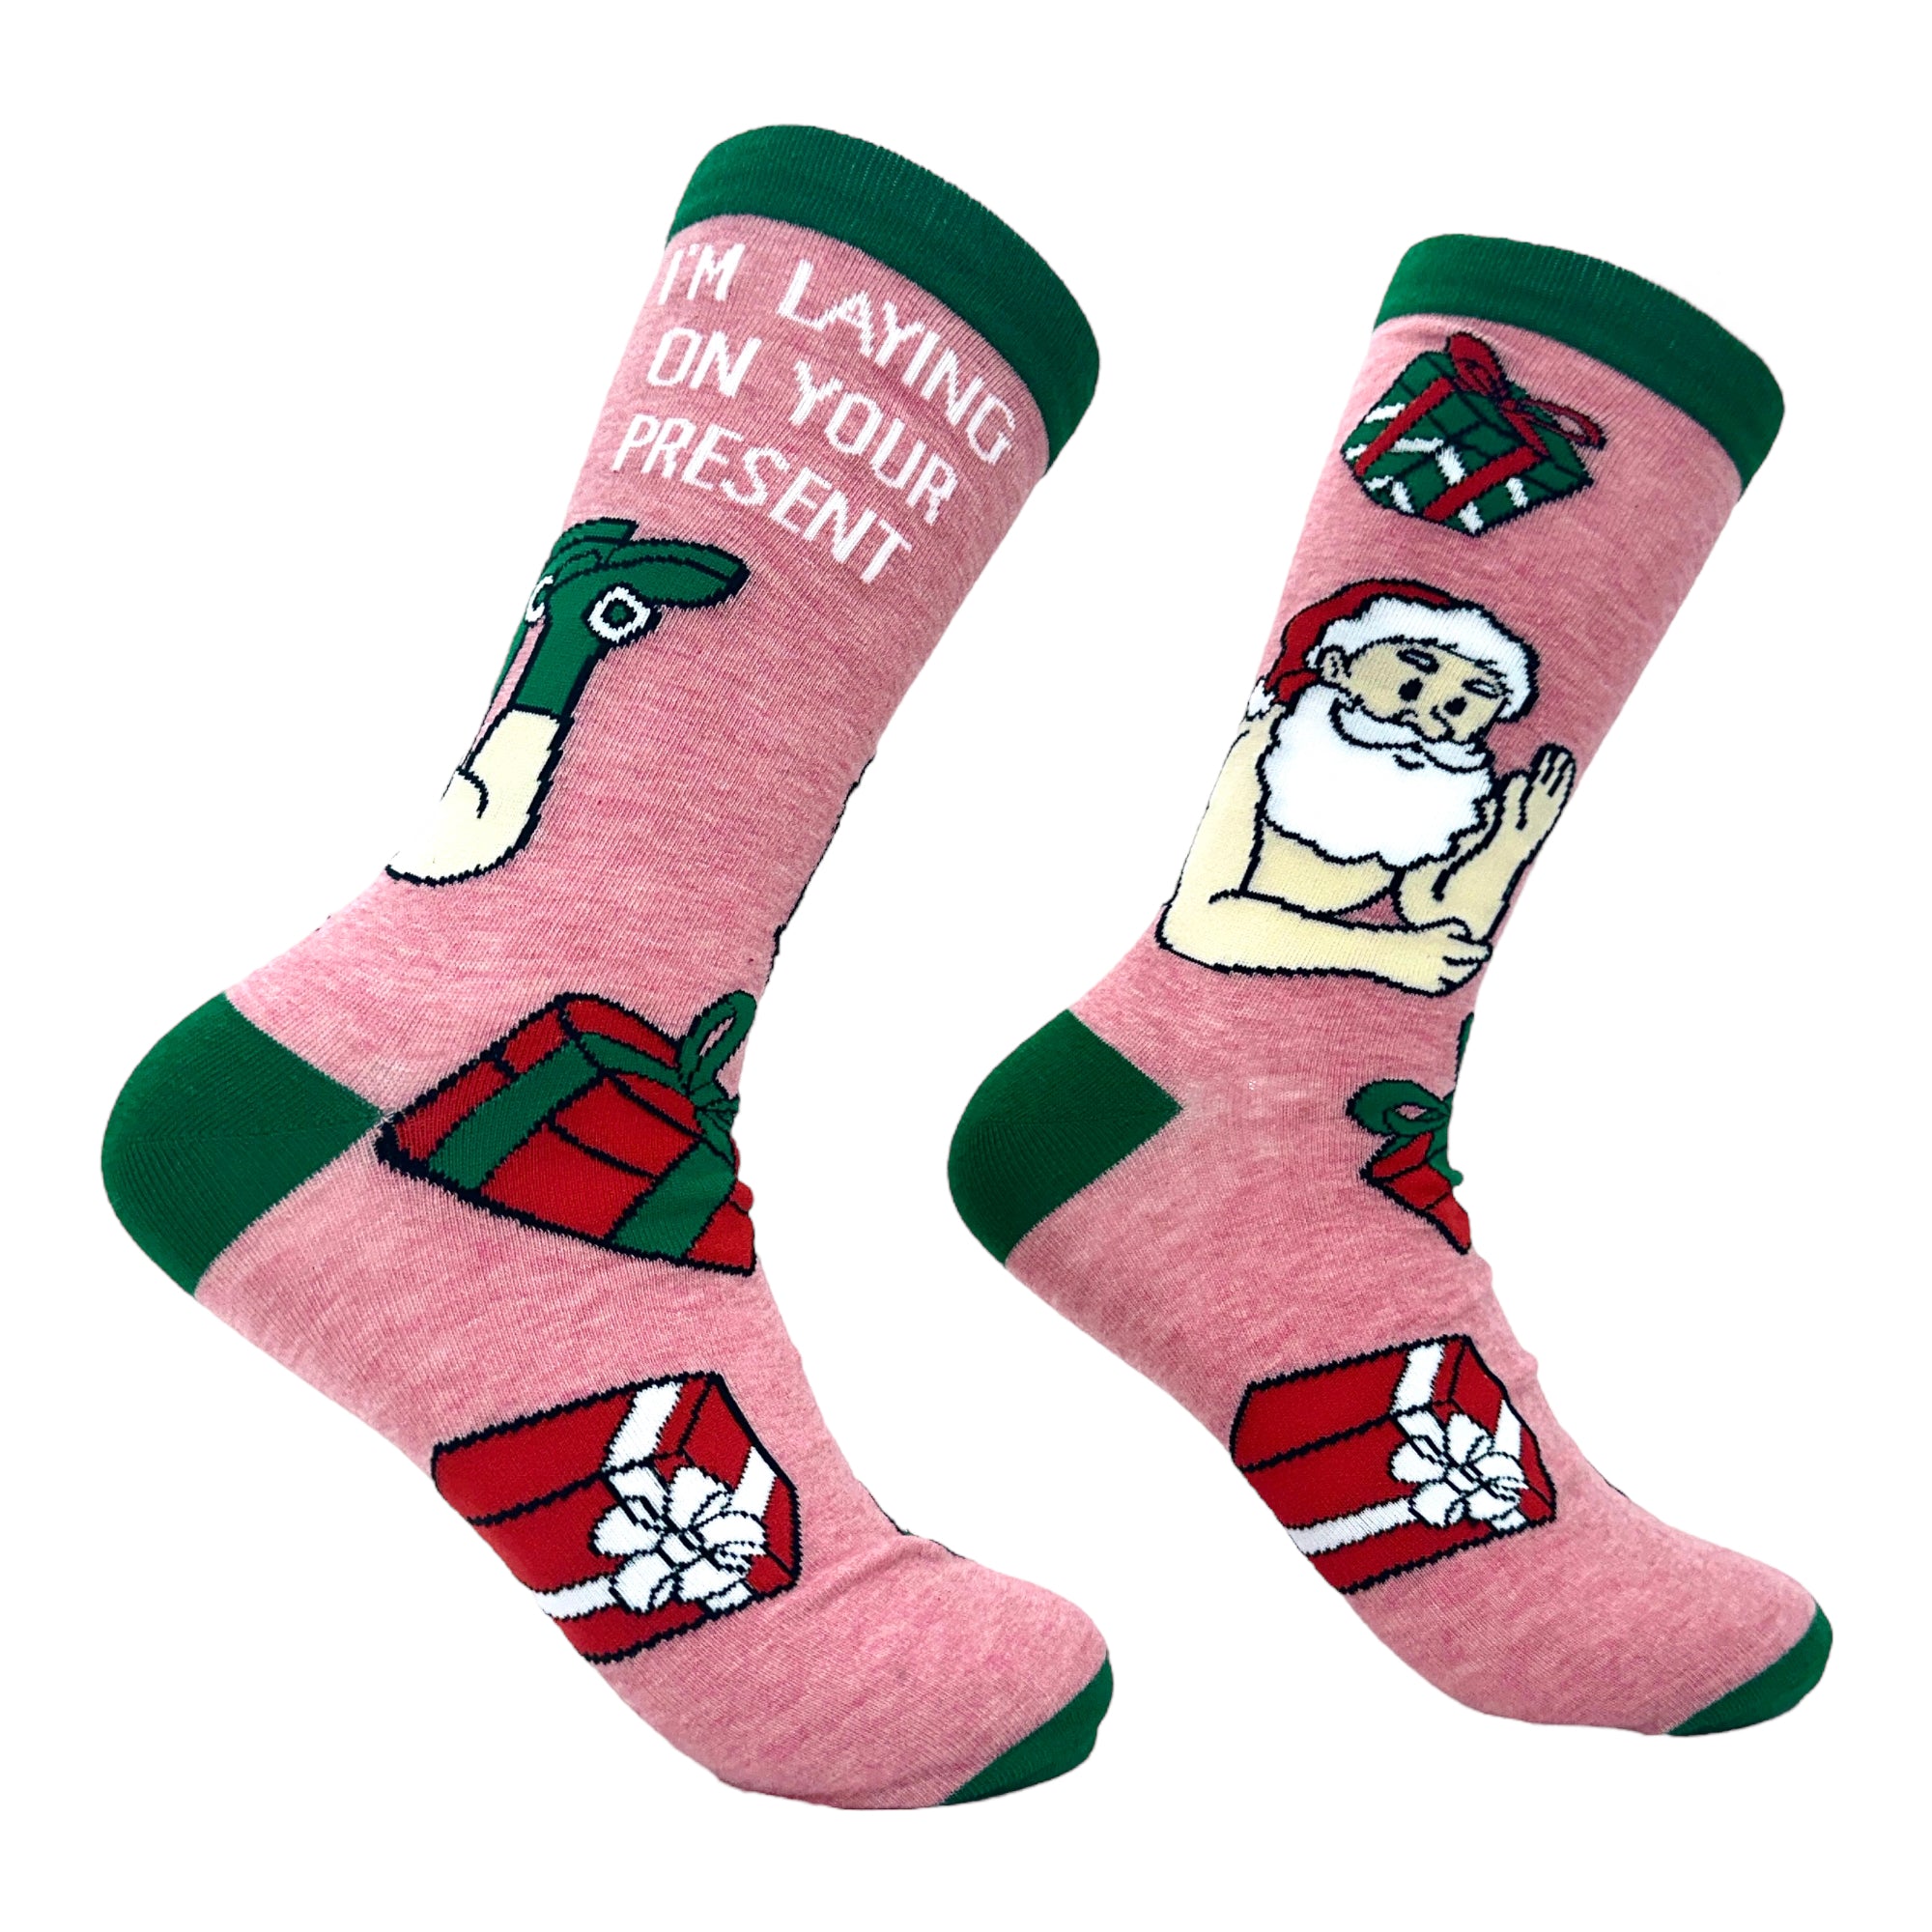 Funny Pink - Laying Men's Im Laying On Your Present Sock Nerdy Christmas sex sarcastic Tee